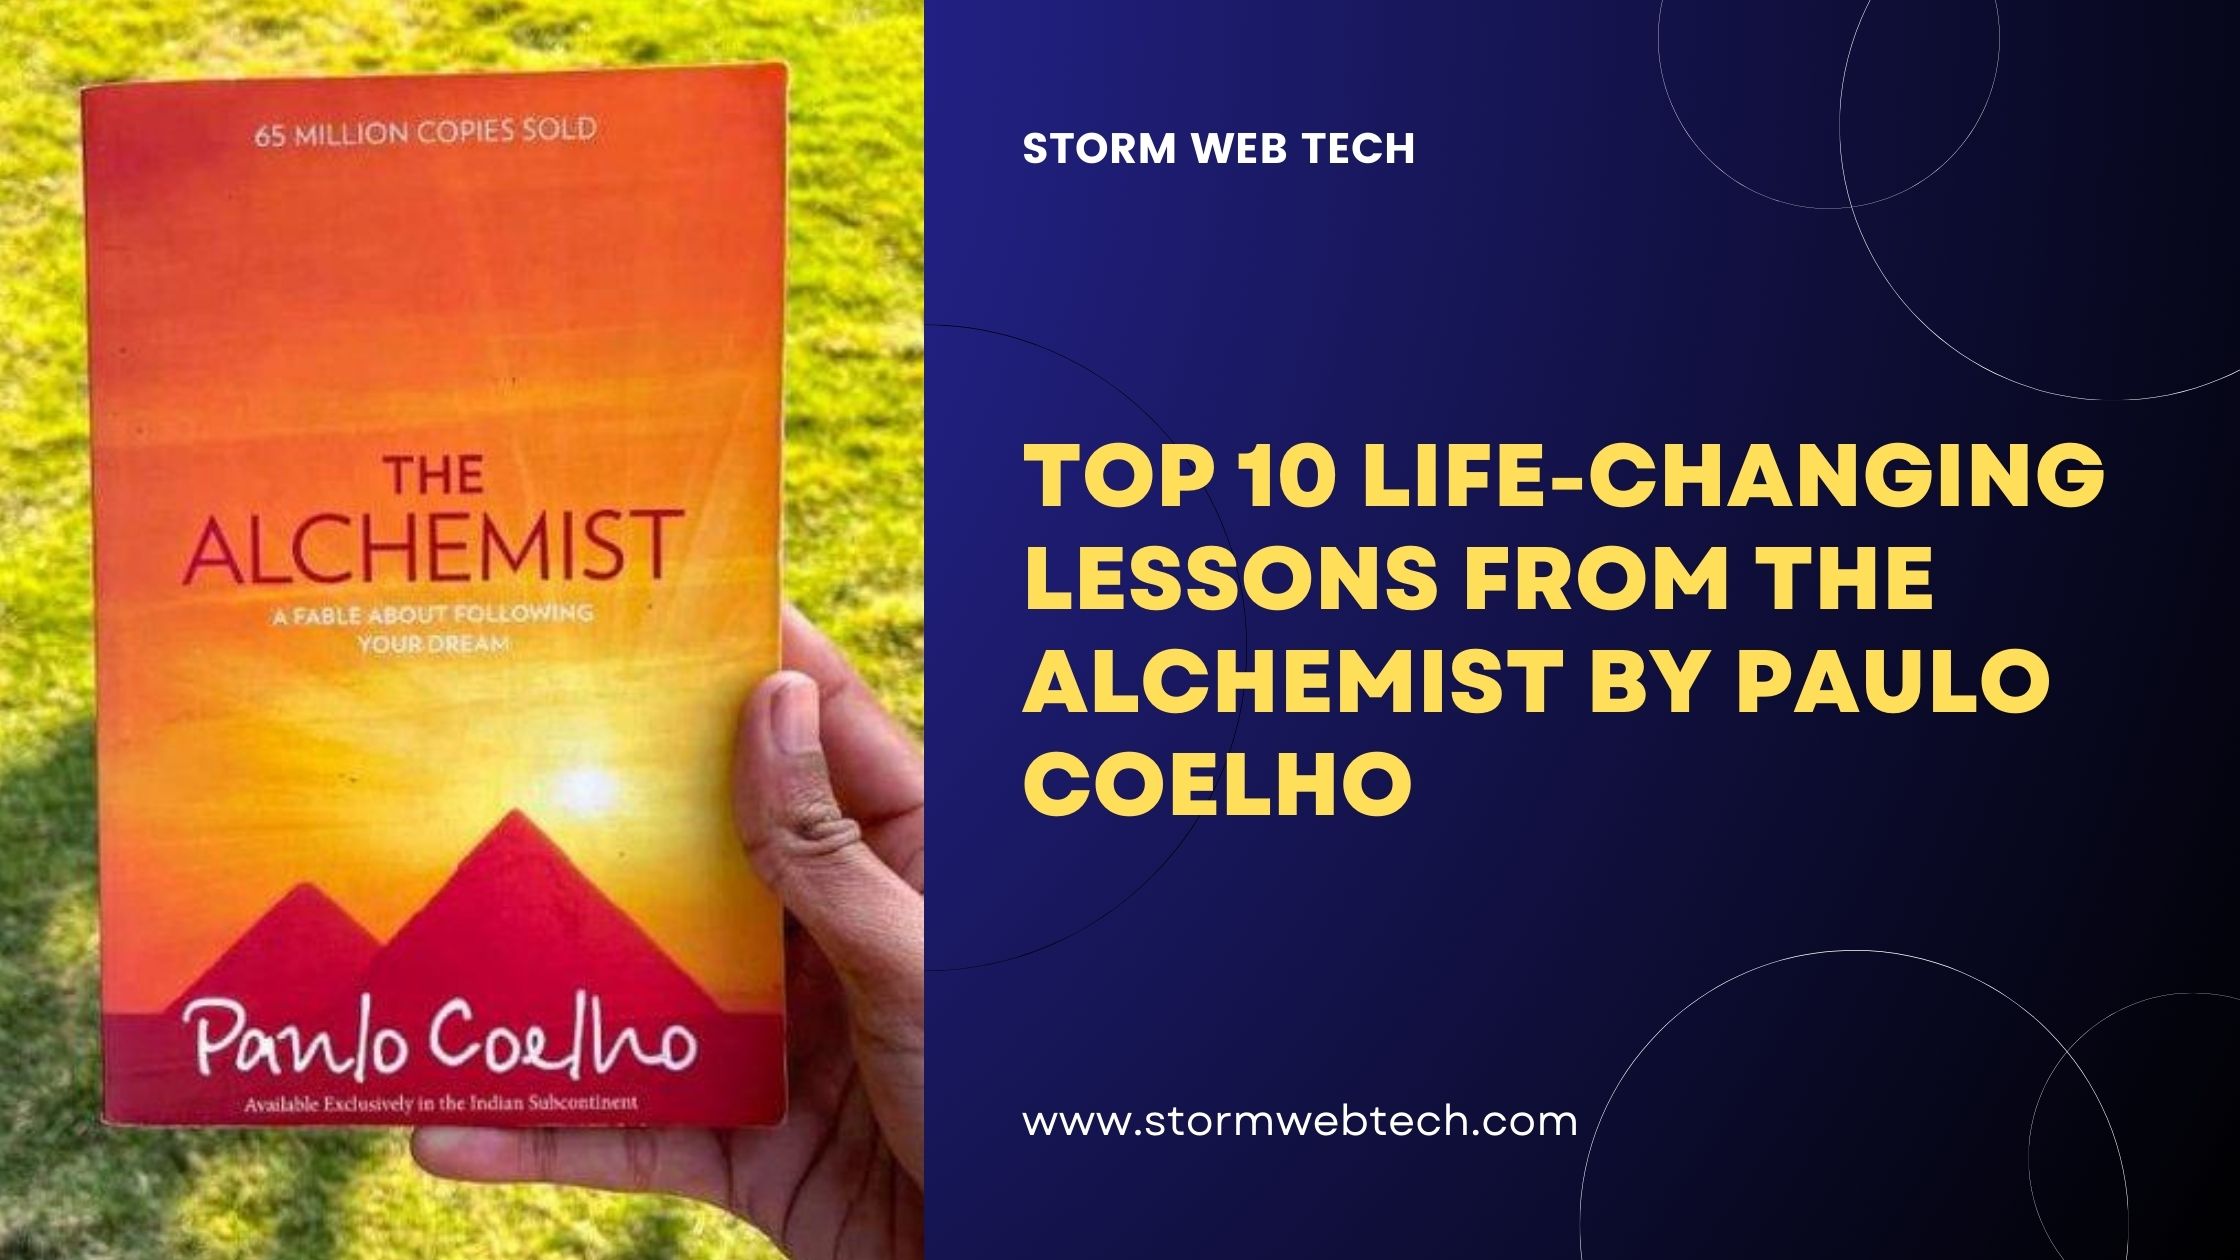 the top 10 life-changing lessons from The Alchemist by Paulo Coelho that can inspire and transform your perspective on life